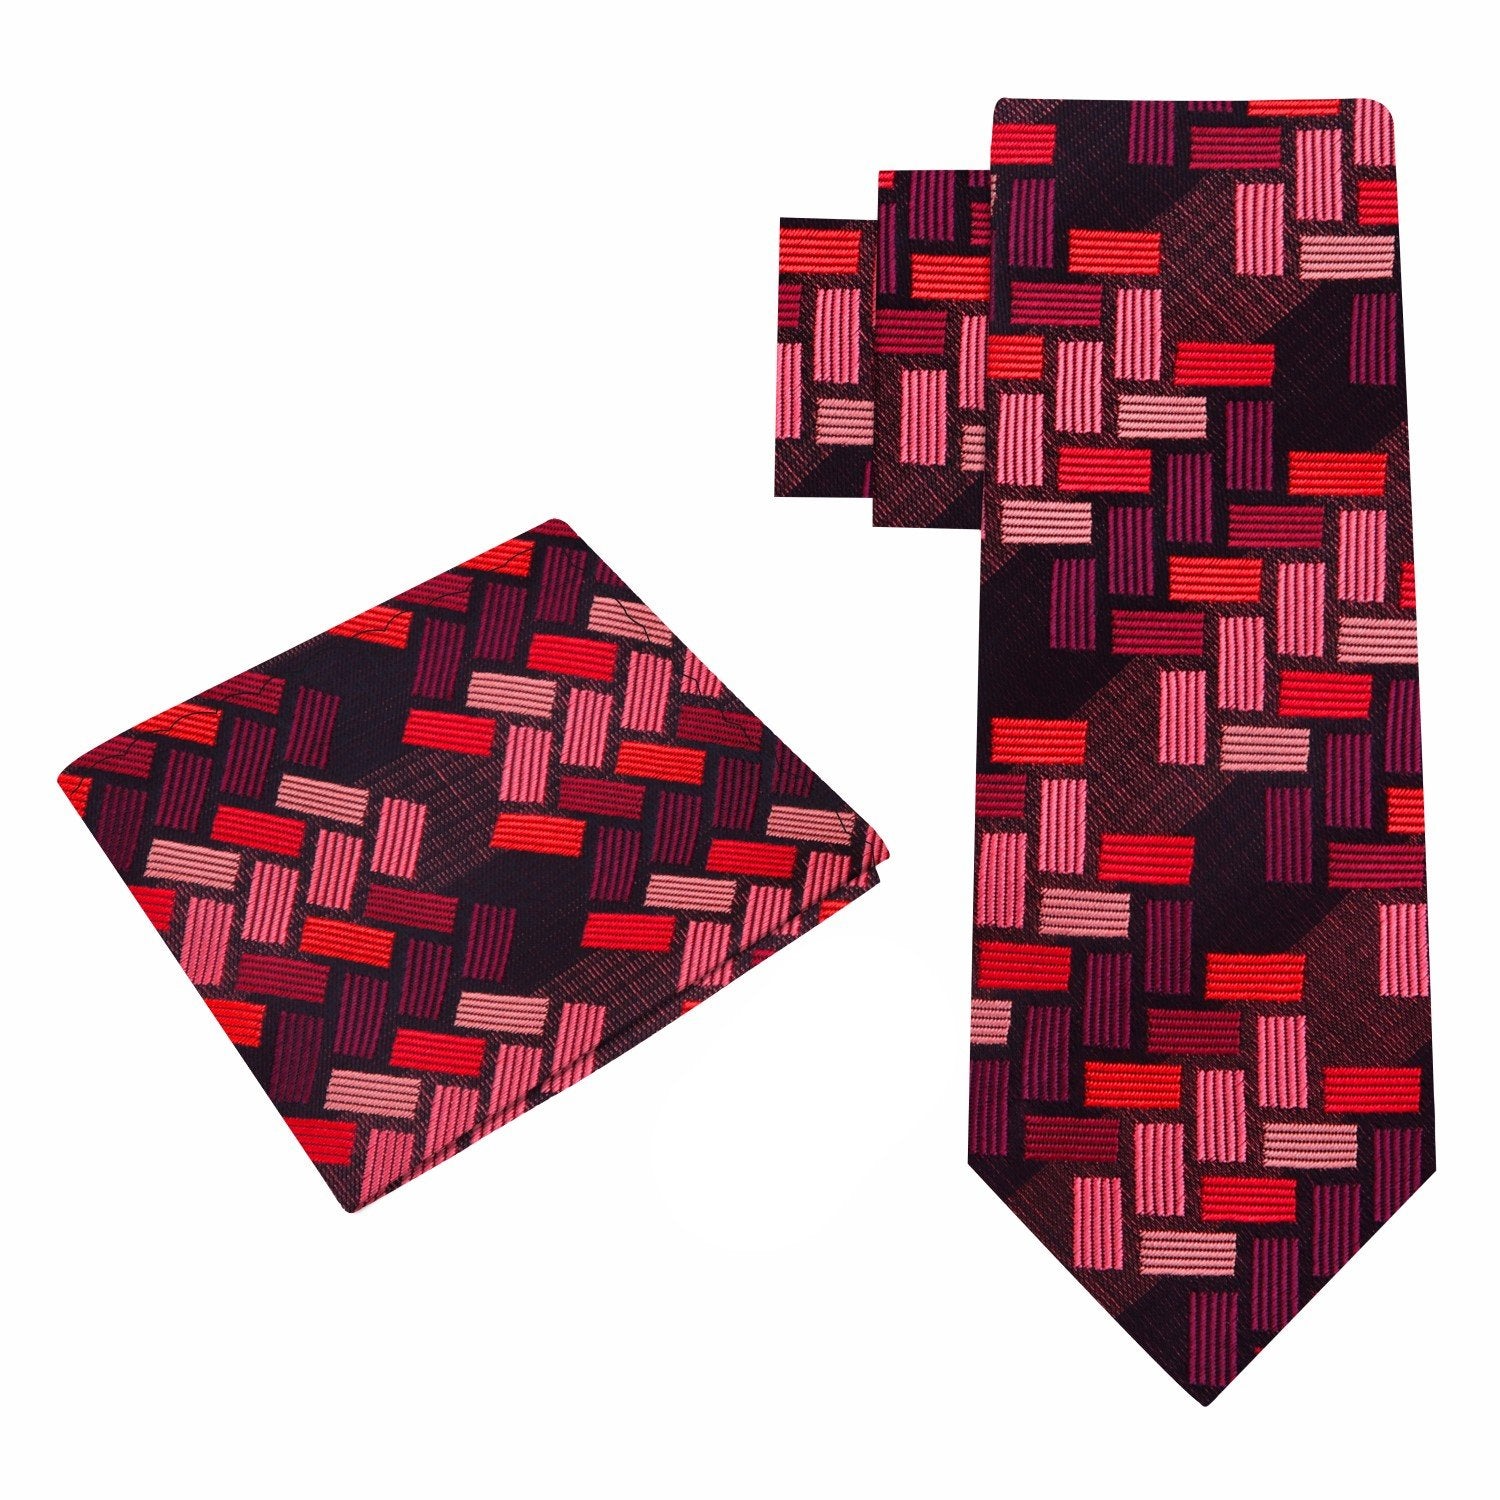 Alt View: Shades of Red Blocks Tie and Pocket Square